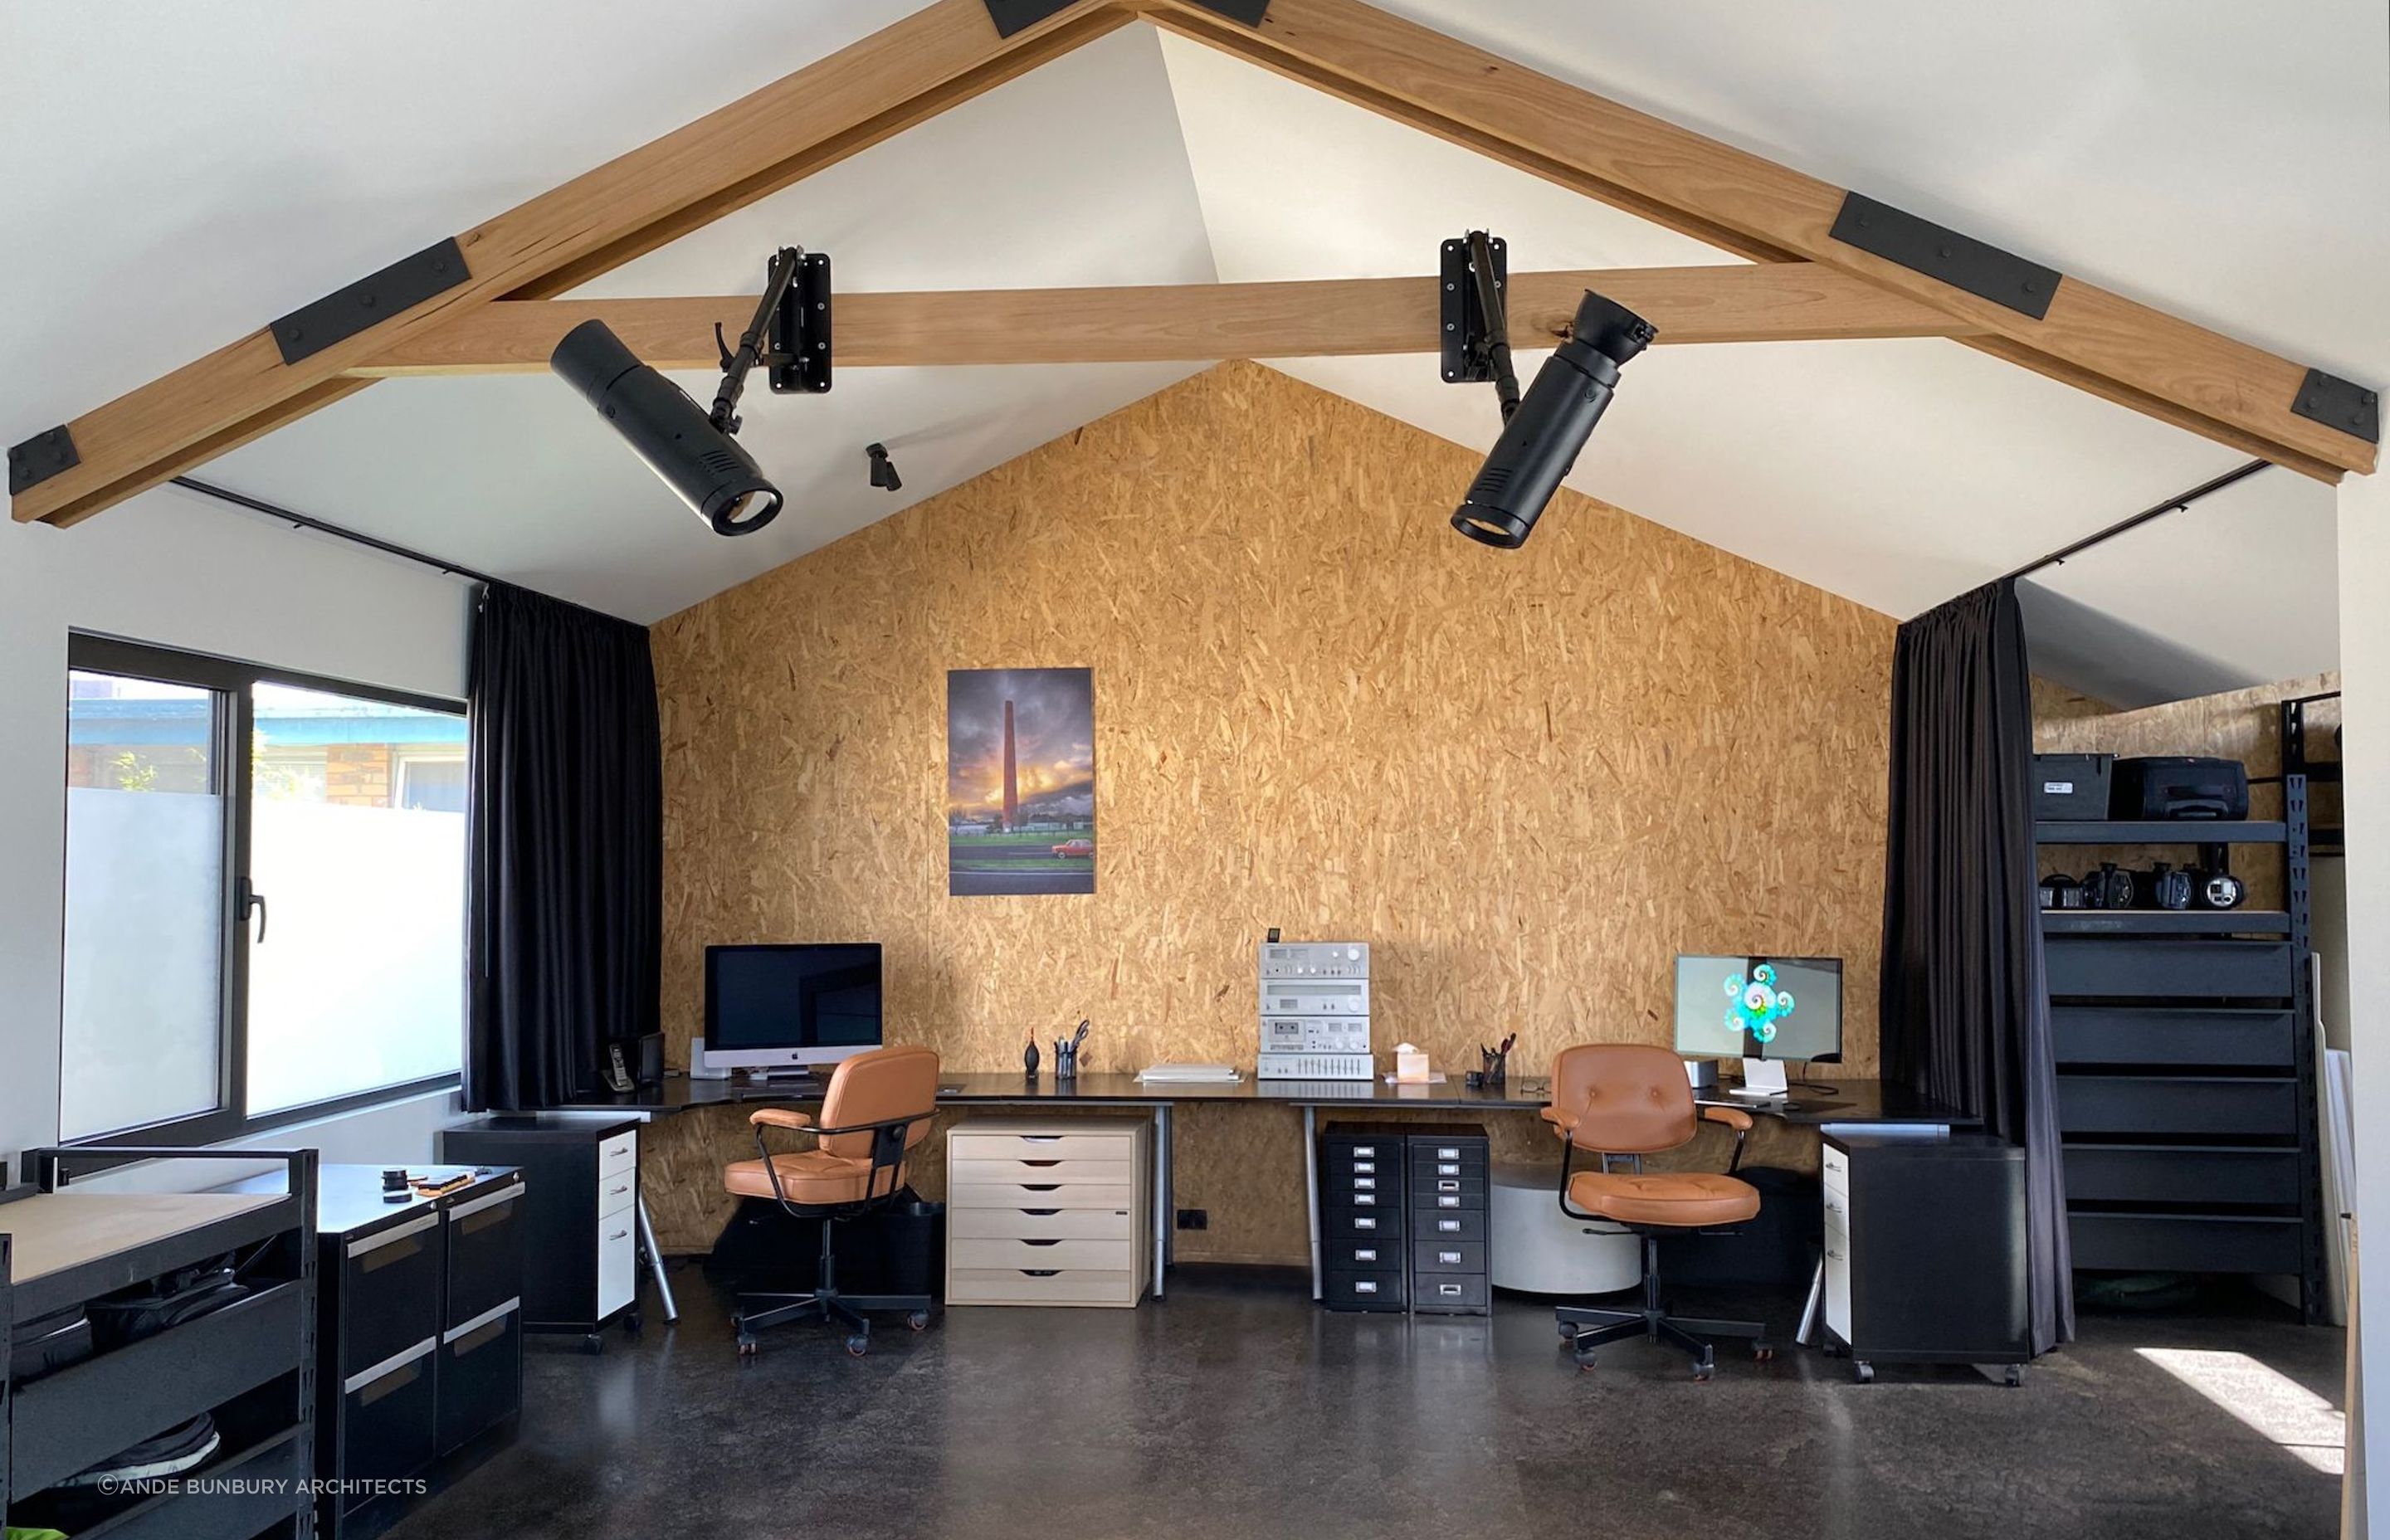 Photography studio with exposed structural insulated panel walls